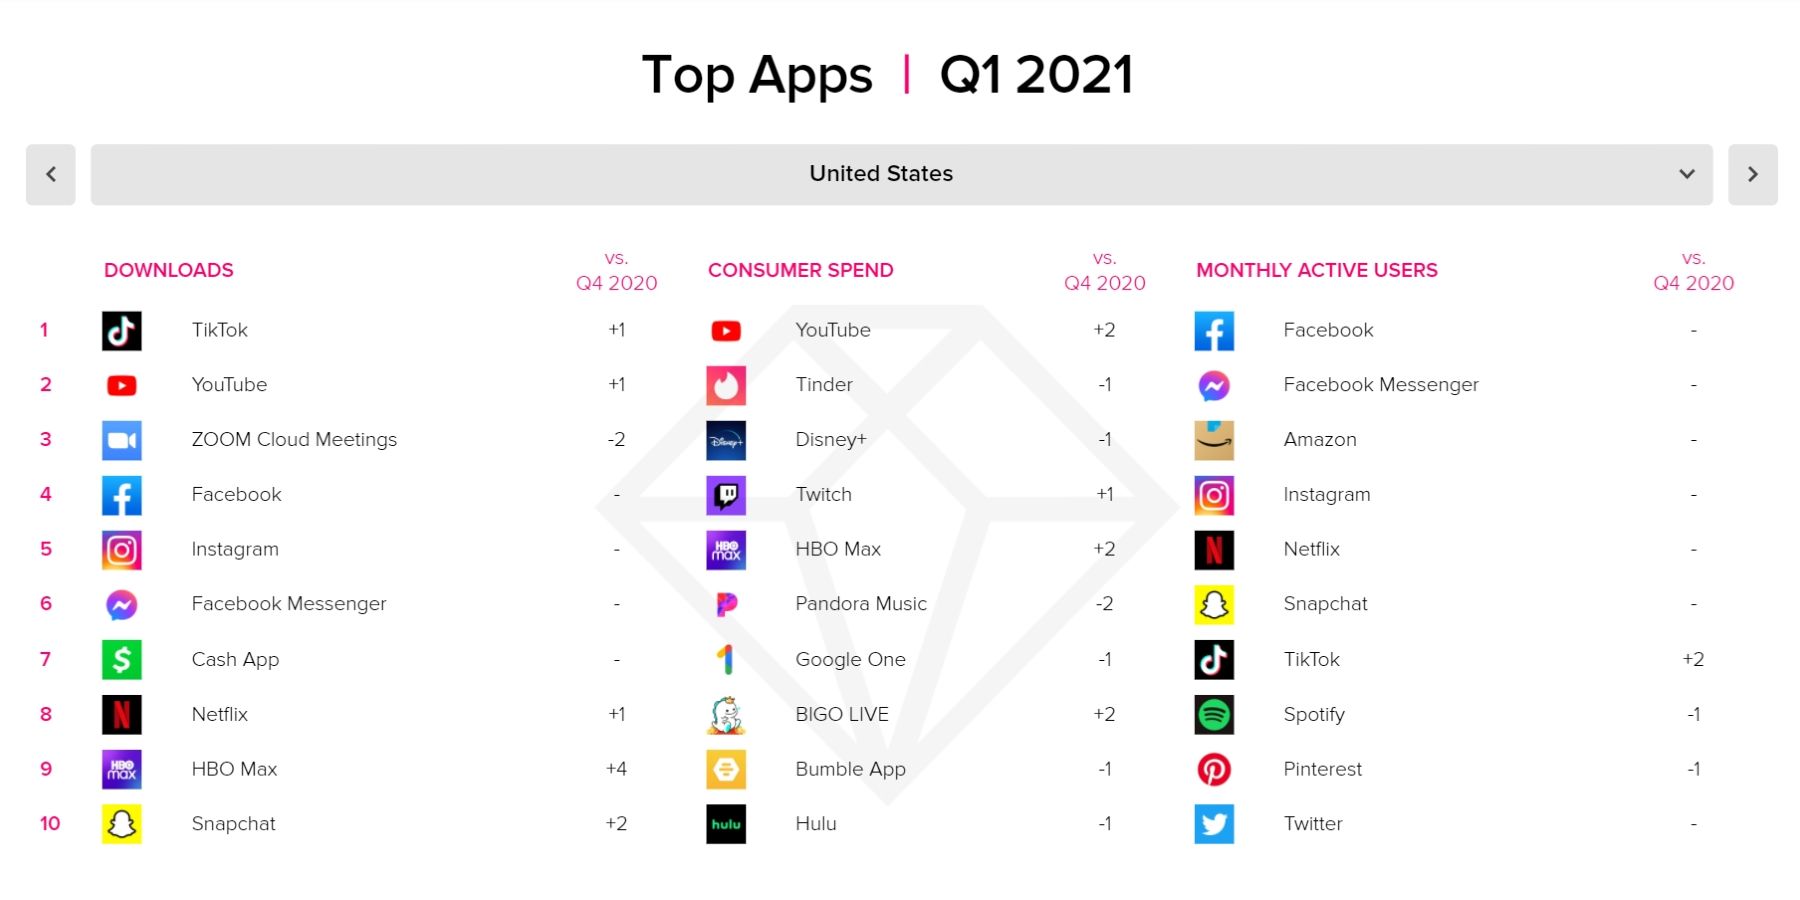 App Annie top apps in US Q1 2021